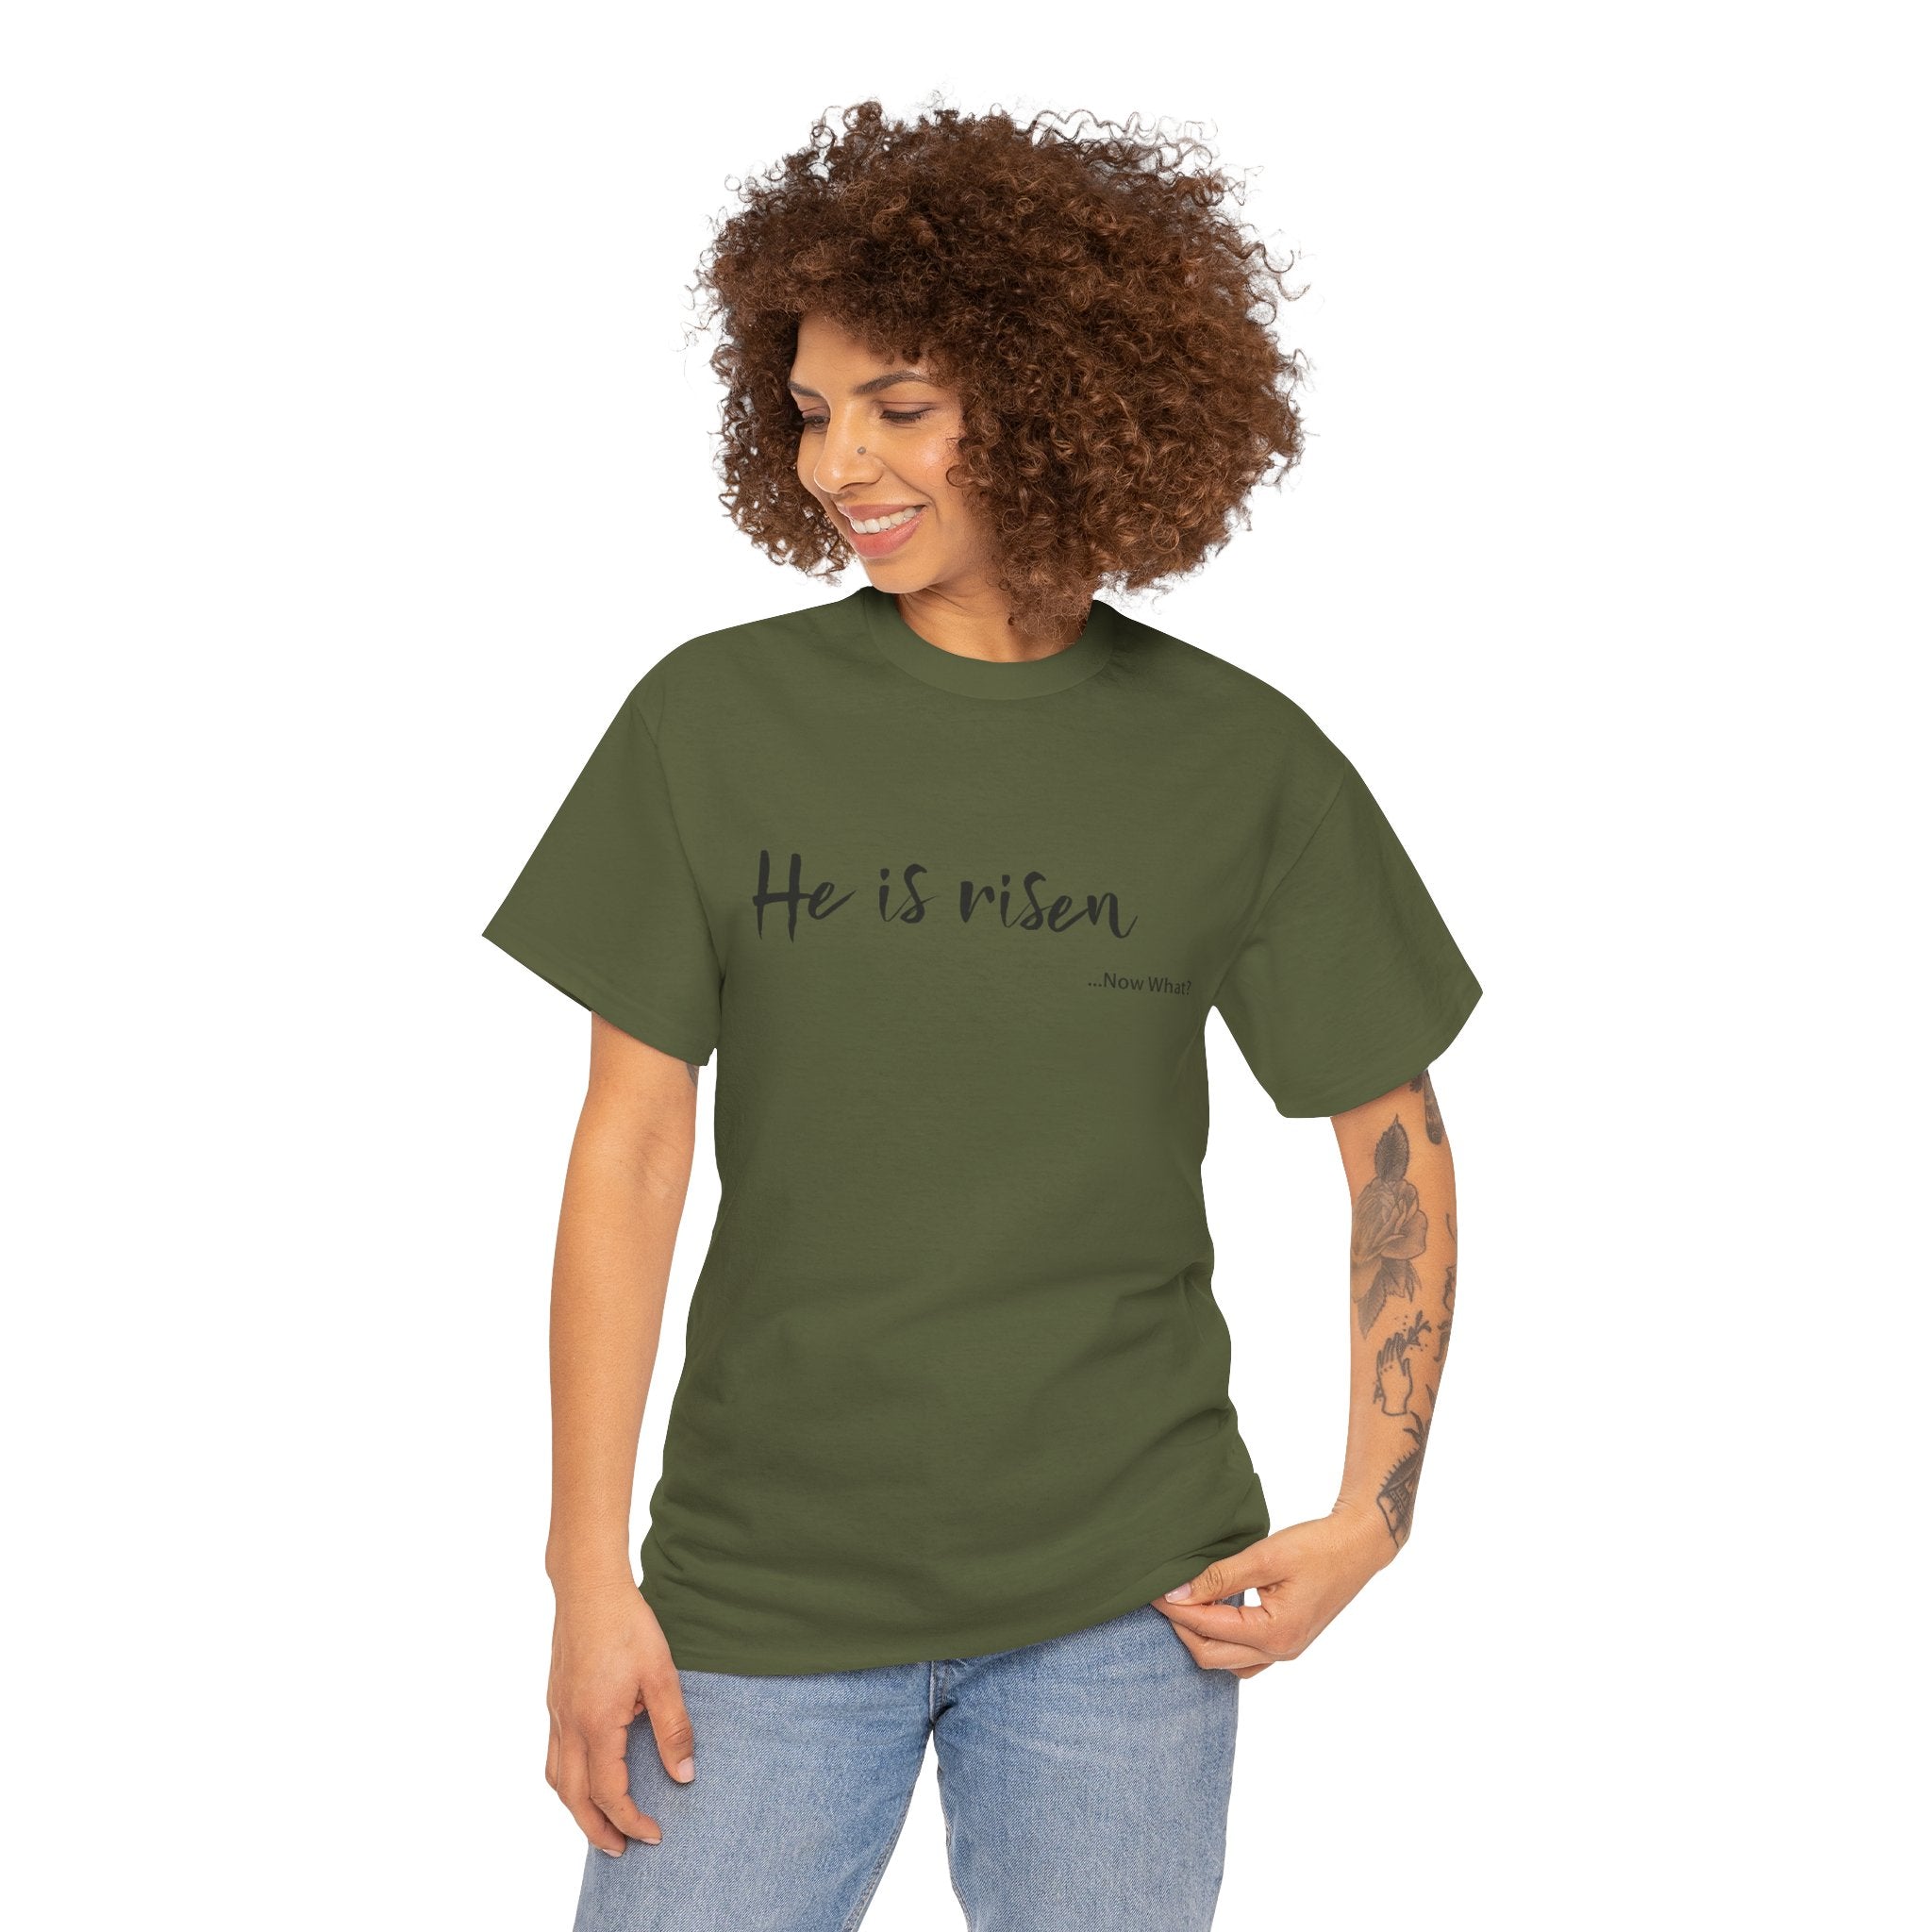 TWC - He Is Risen...Now What?-Unisex Heavy Cotton Tee